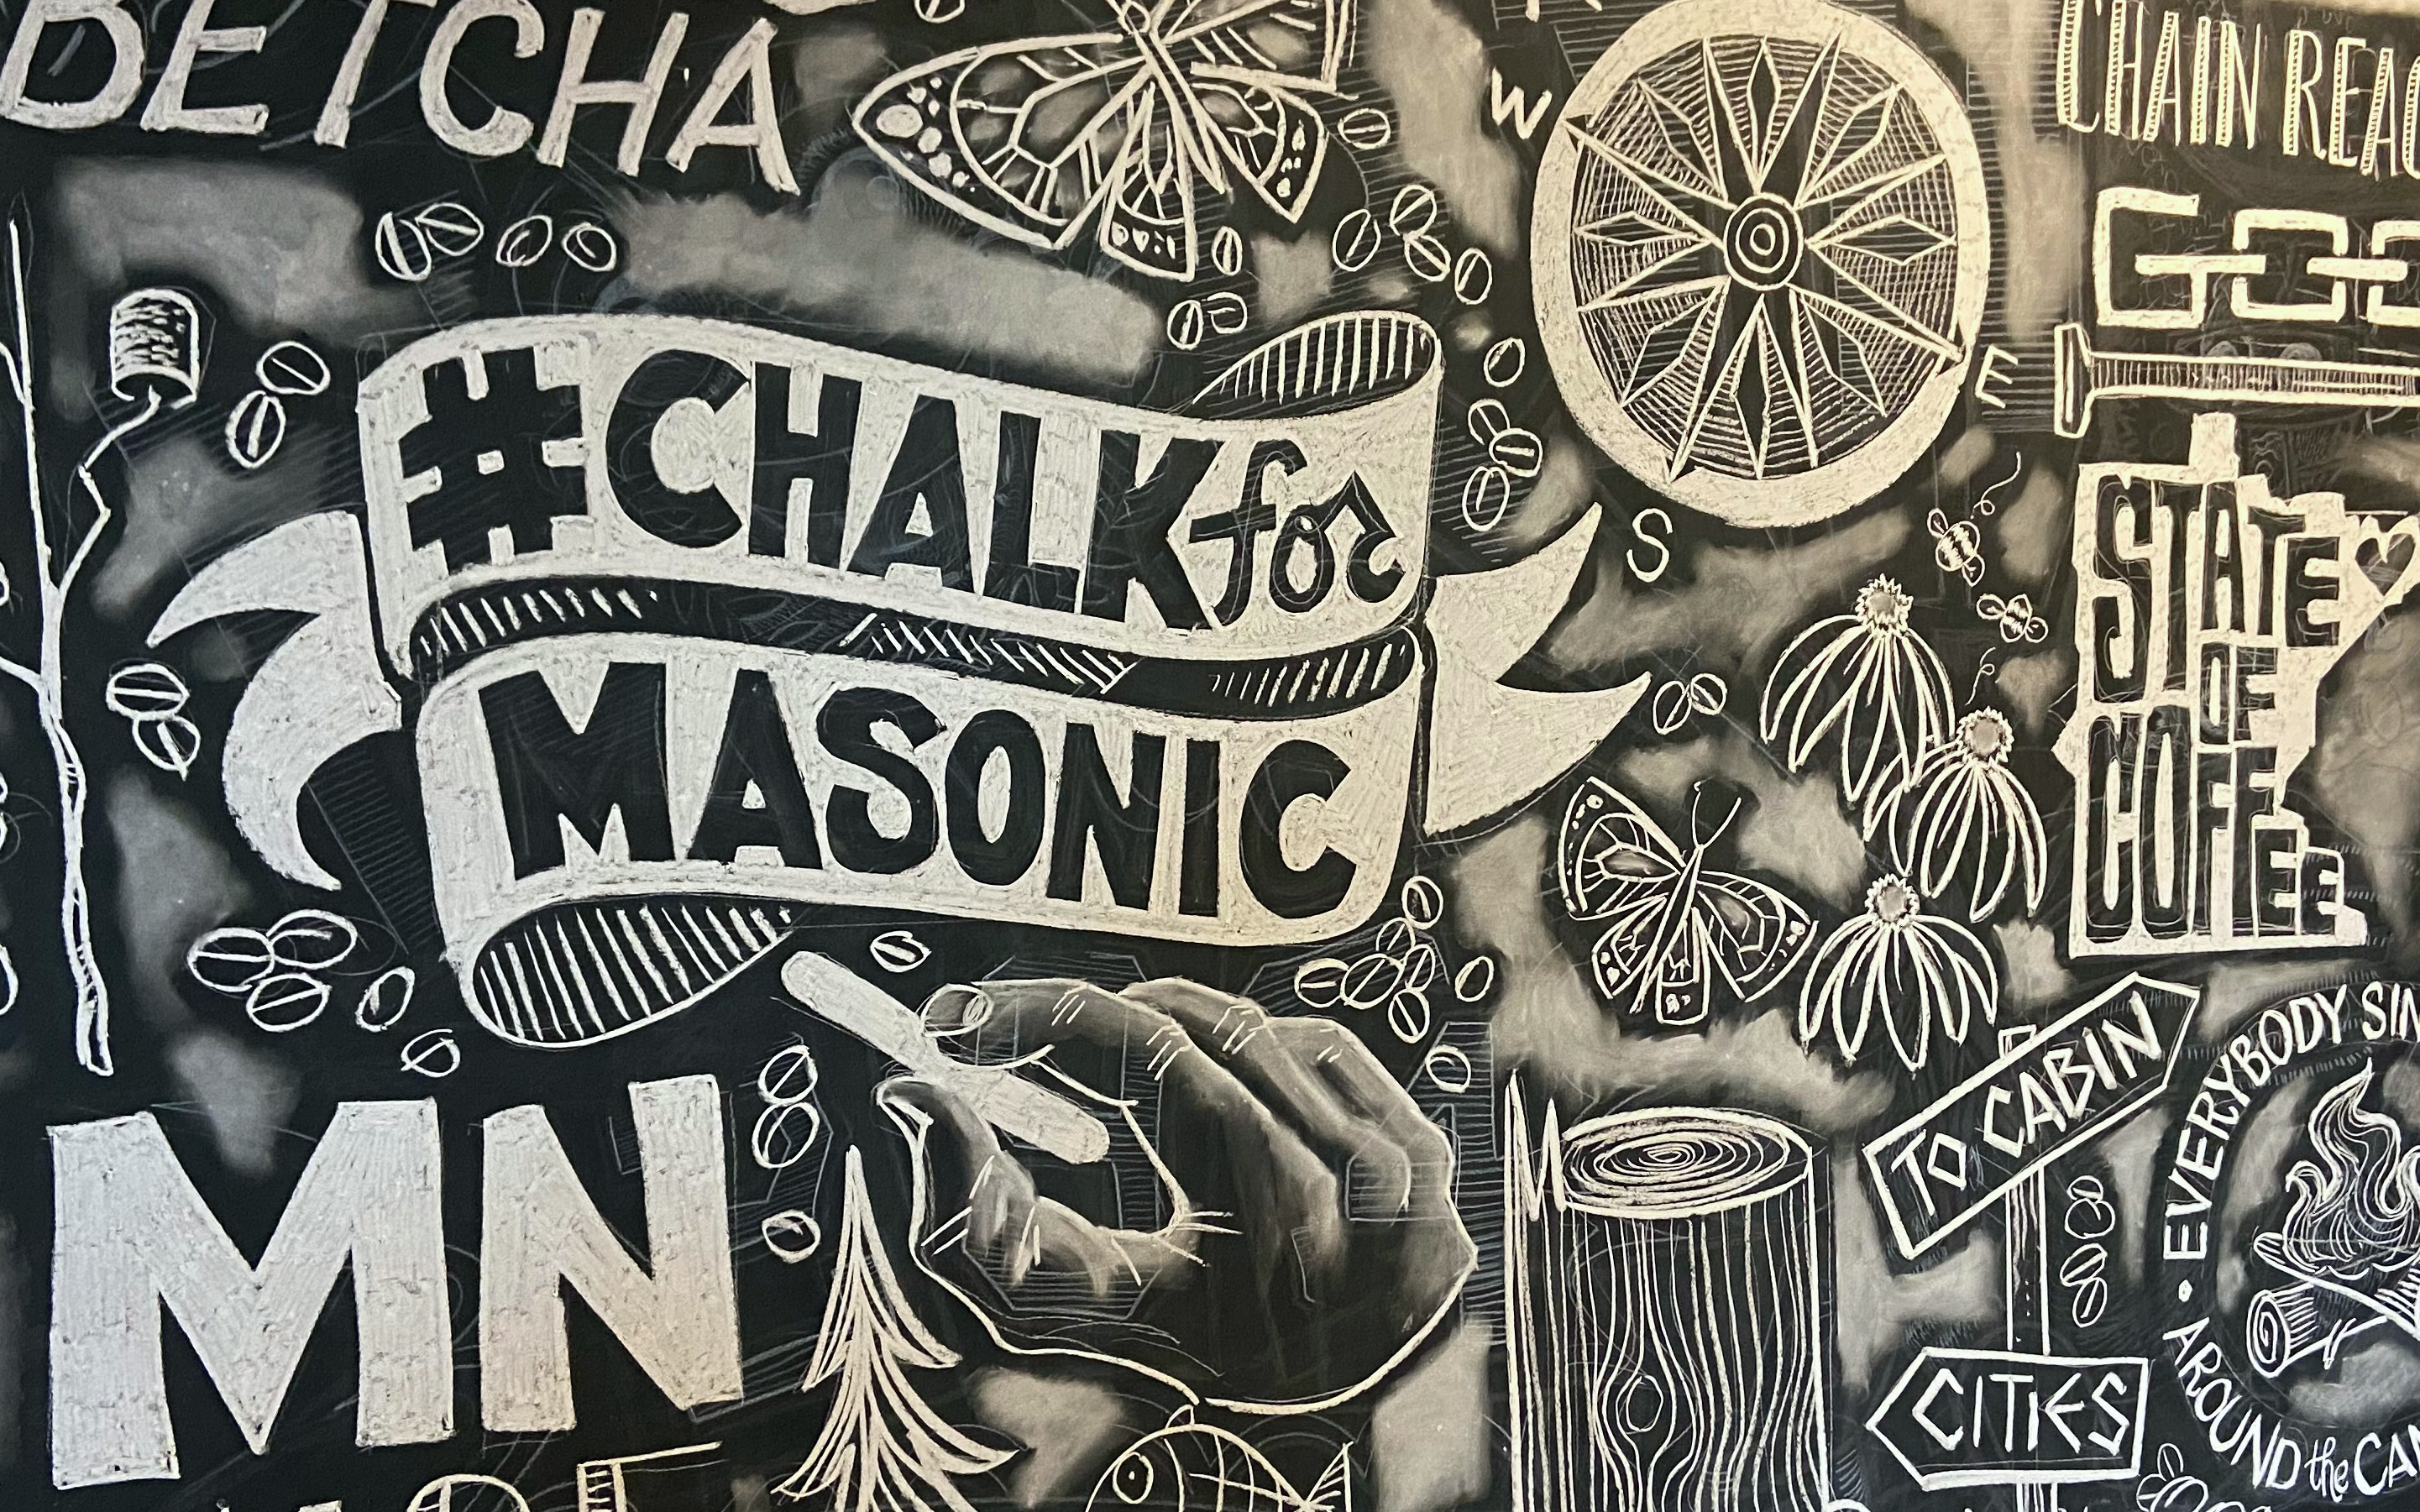 Create Art Fight Cancer Chalk For Masonic Event